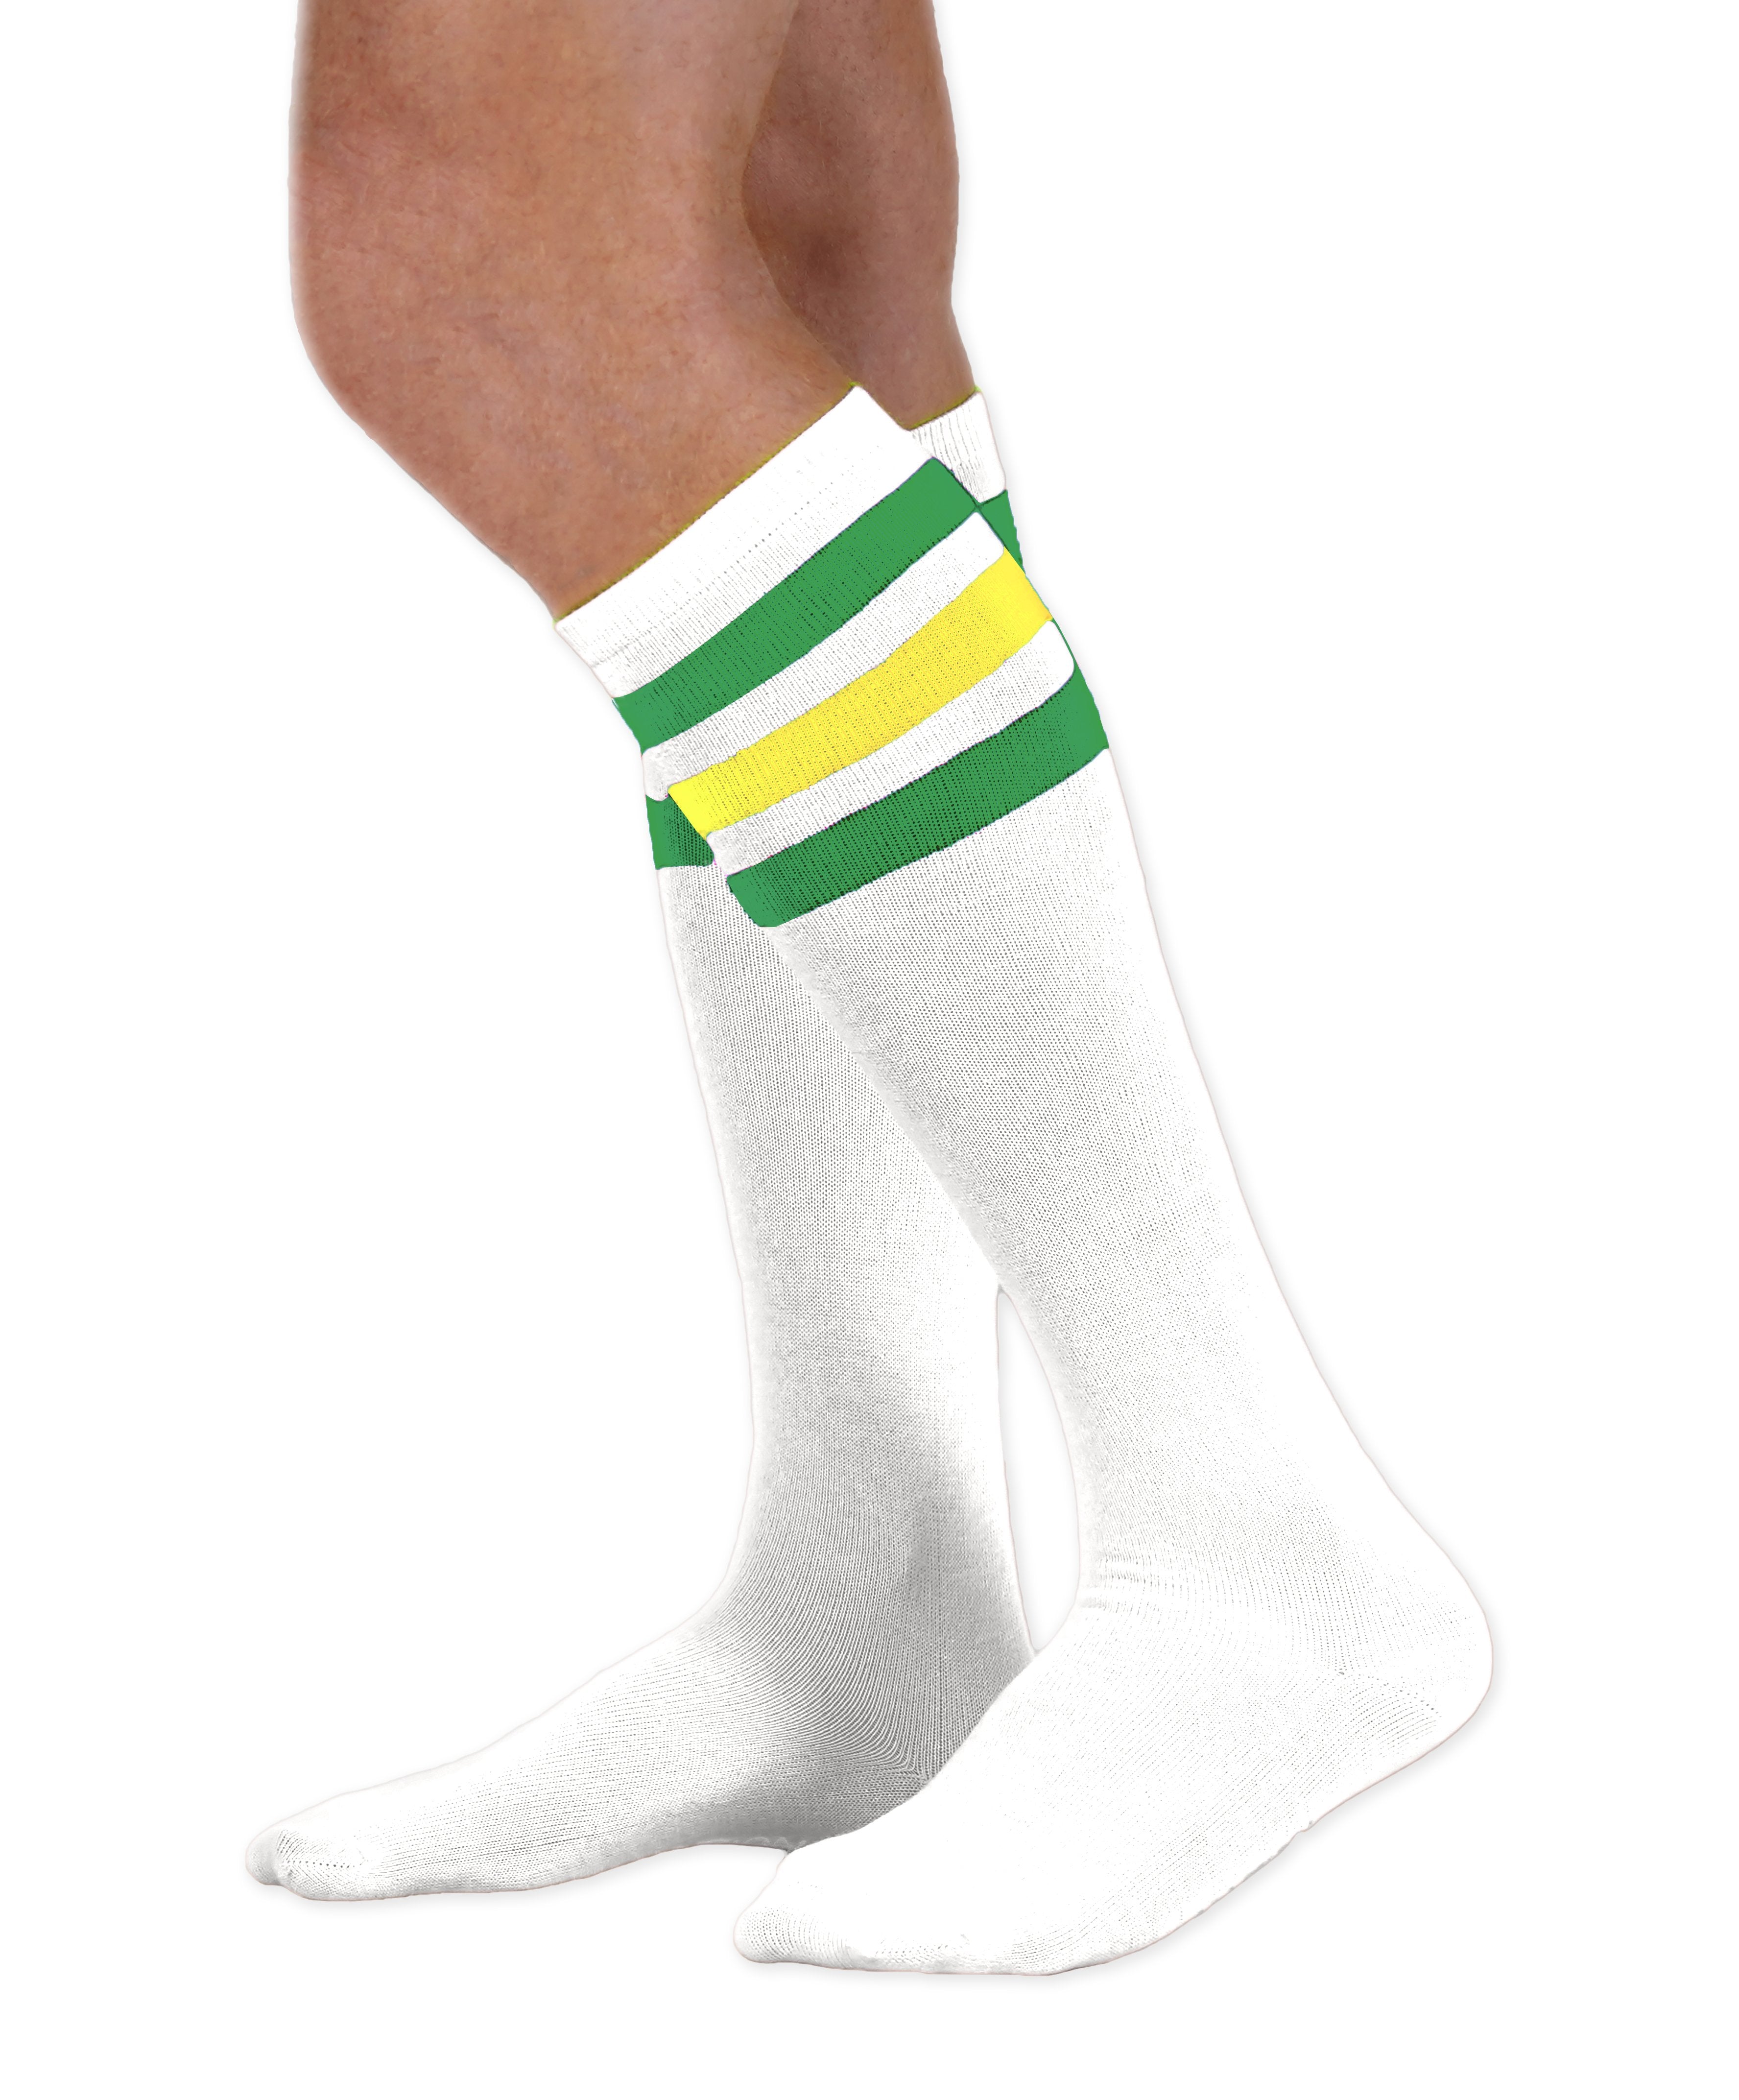 Unisex adult size white knee high tube sock with three kelly green and yellow stripes